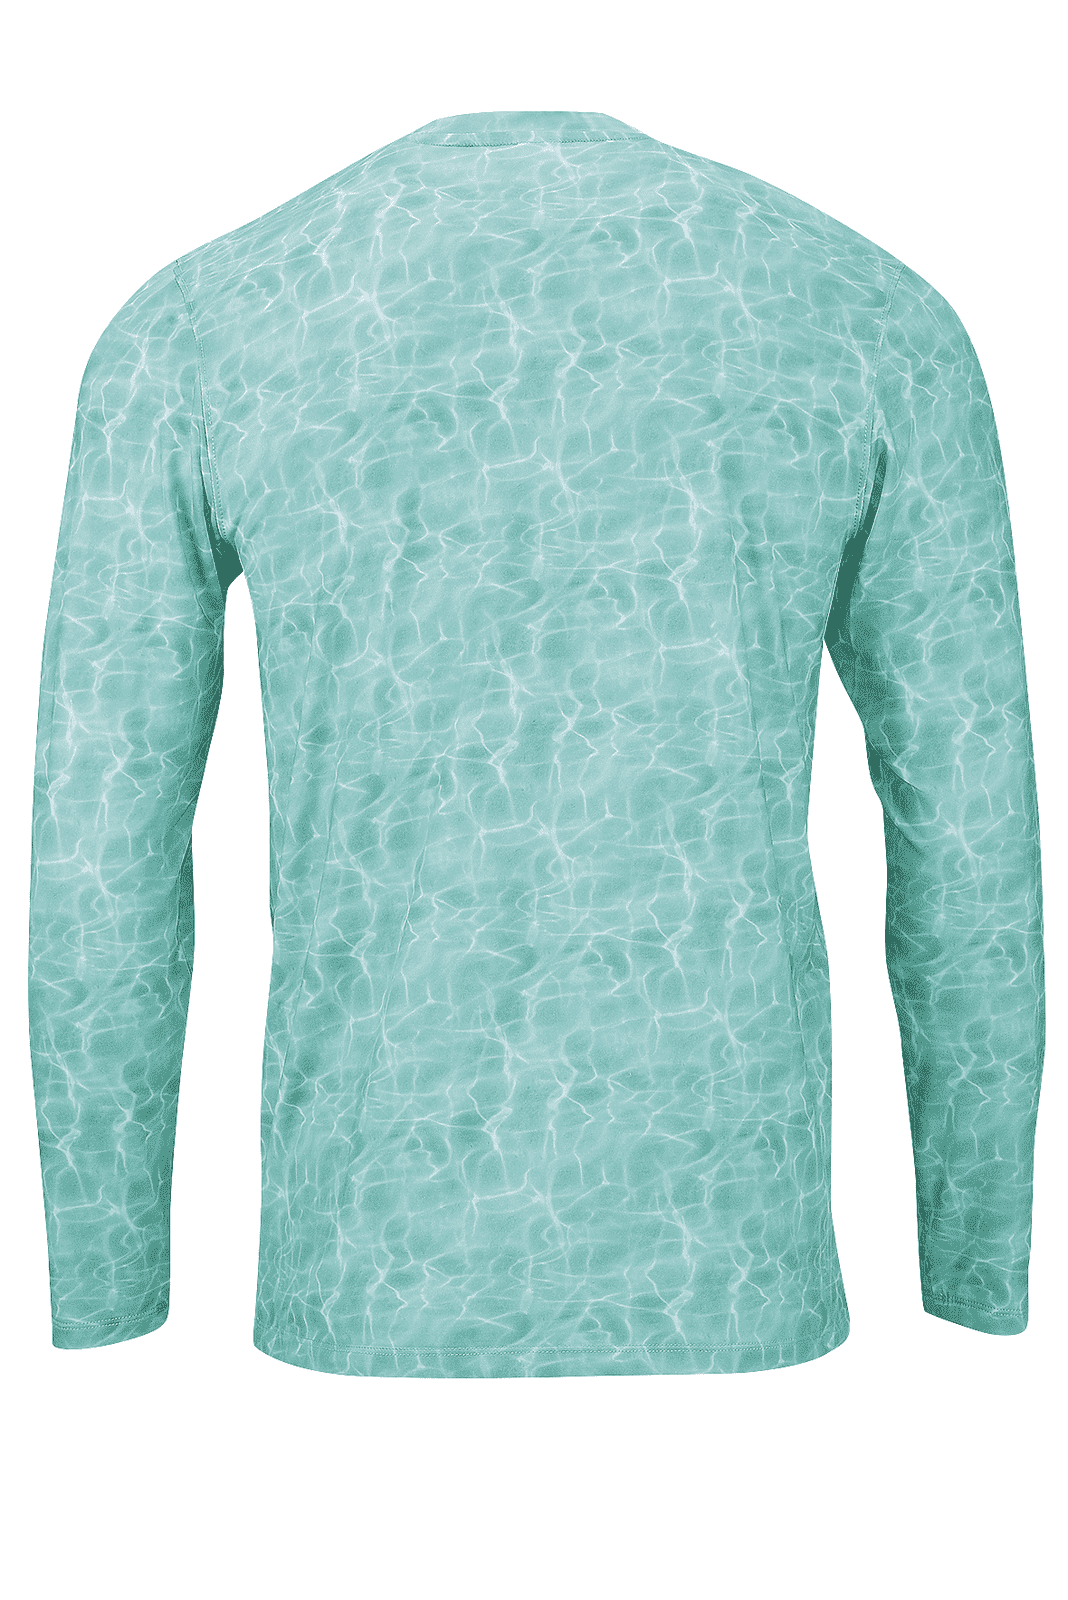 Paragon 230 Belize Adult Long Sleeve Performance Tee - Emerald Water - HIT a Double